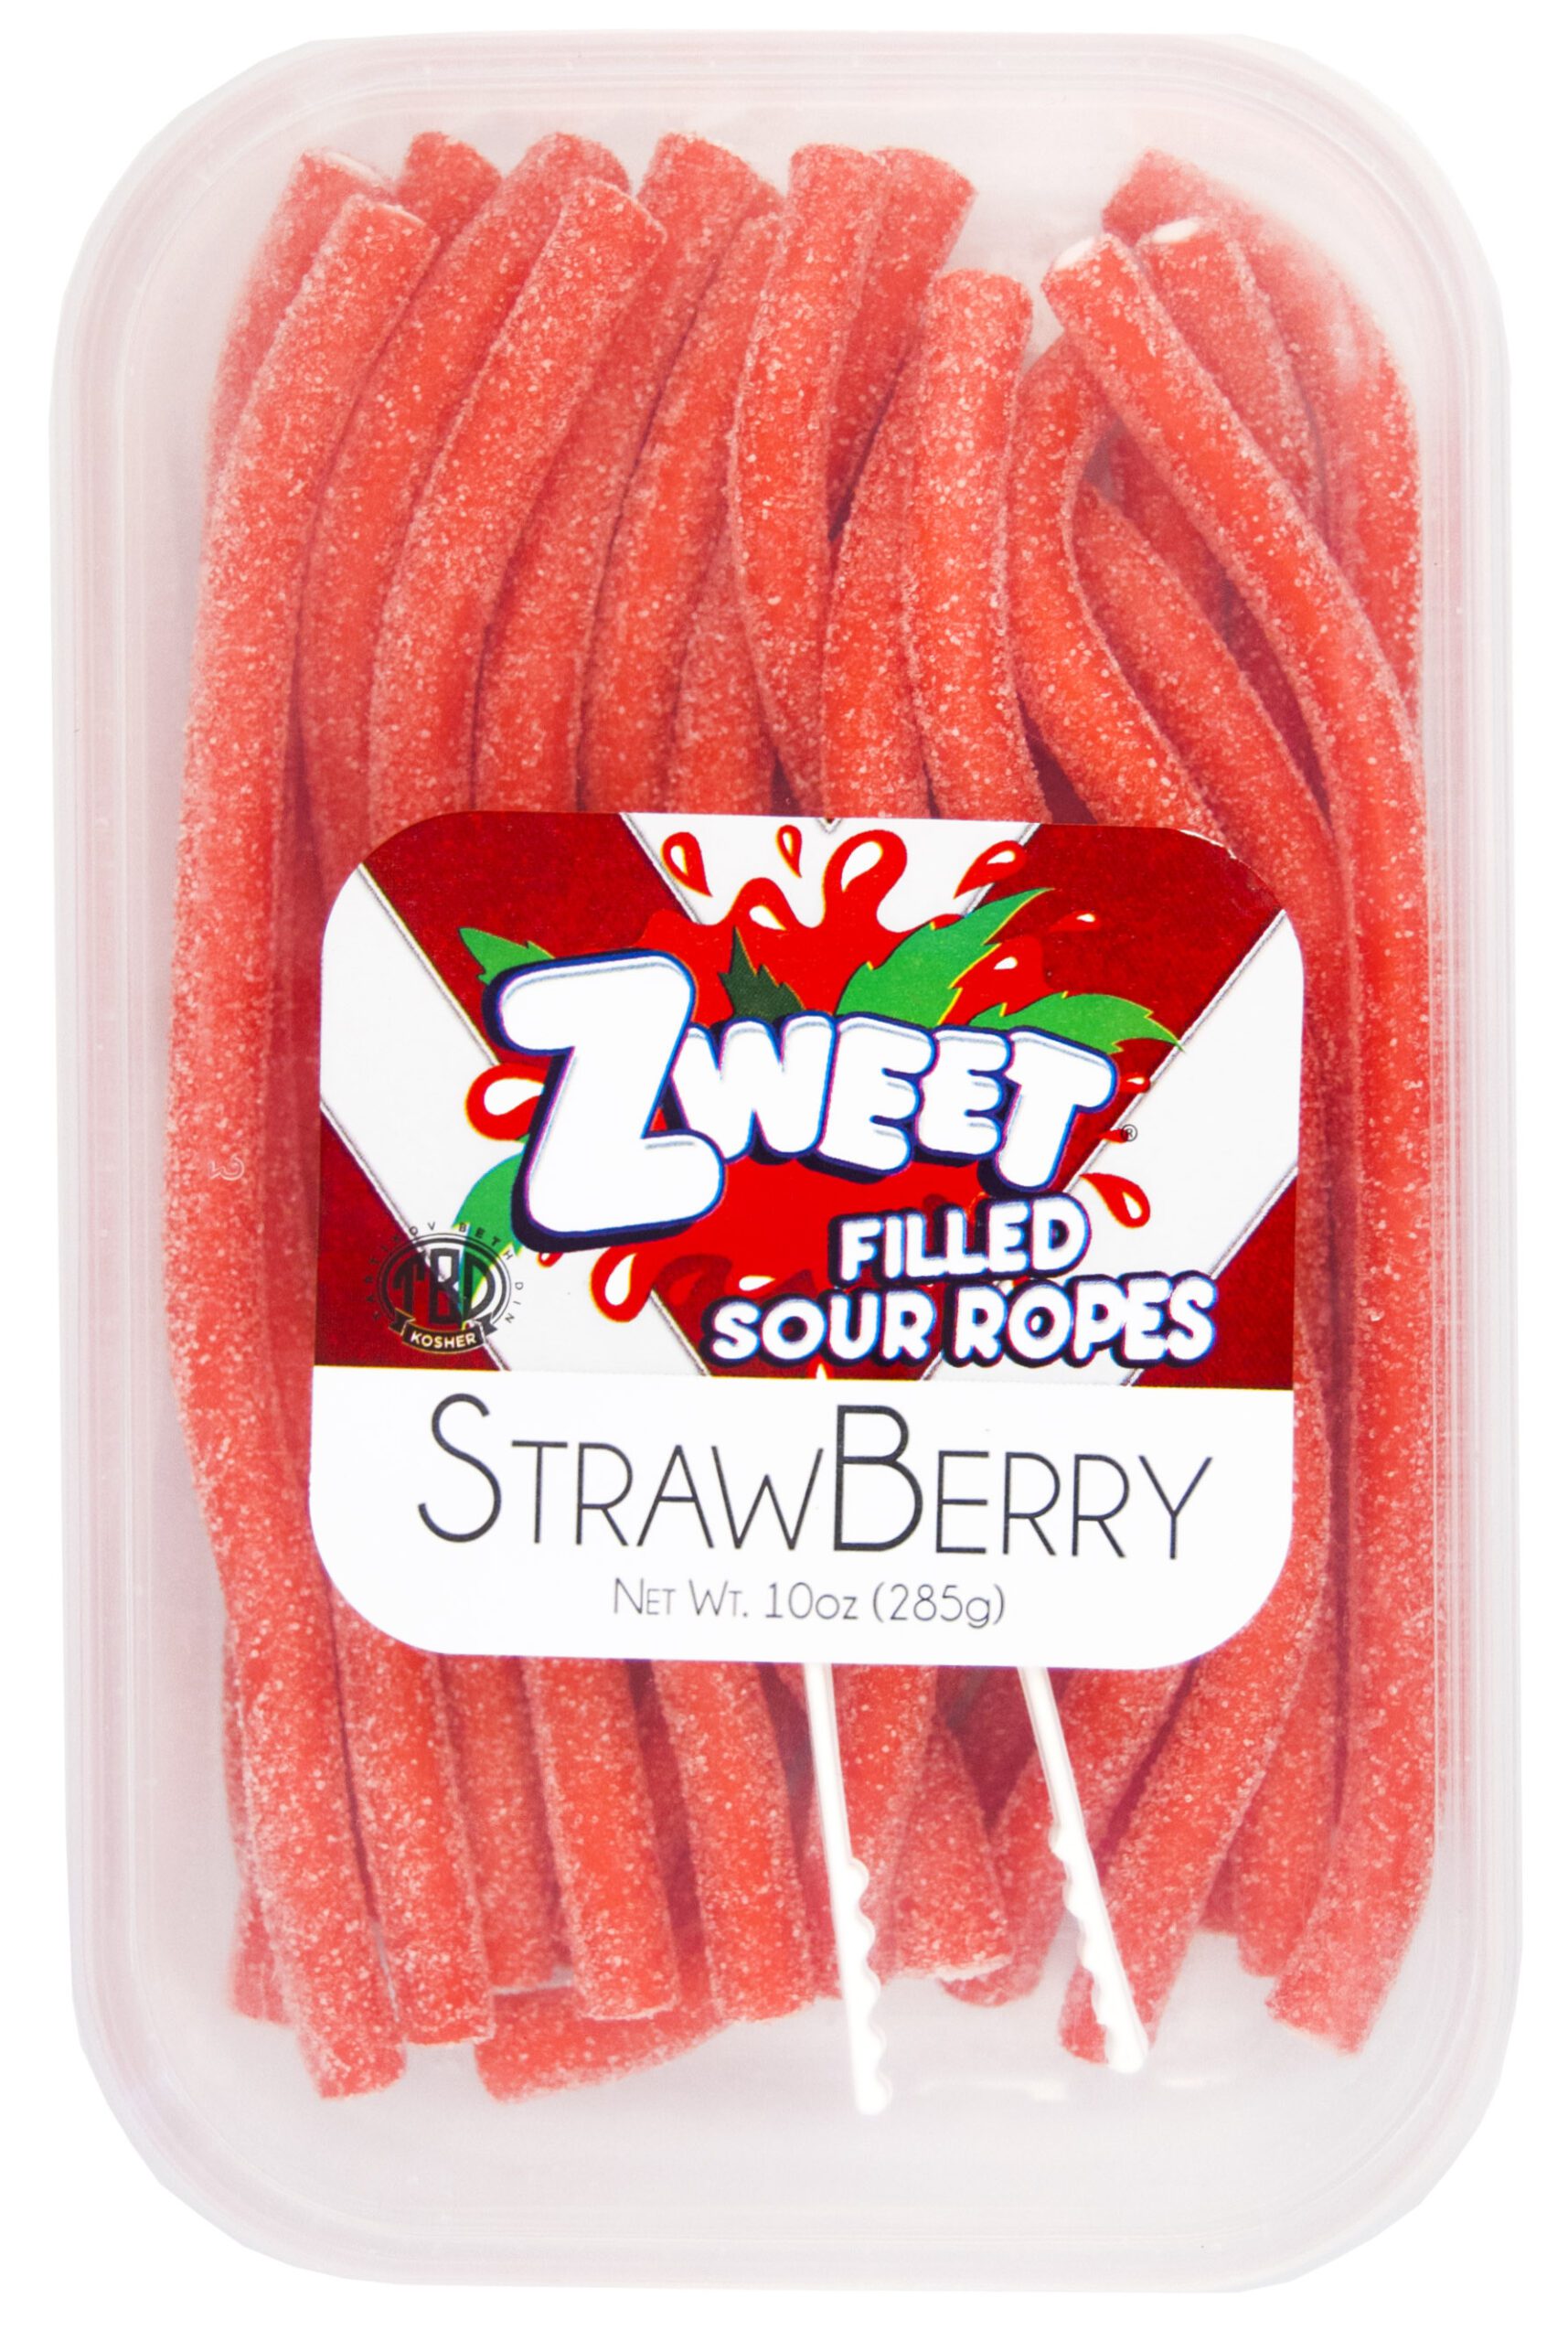 GALIL ZWEET SOUR ROPES STRAWBERRY